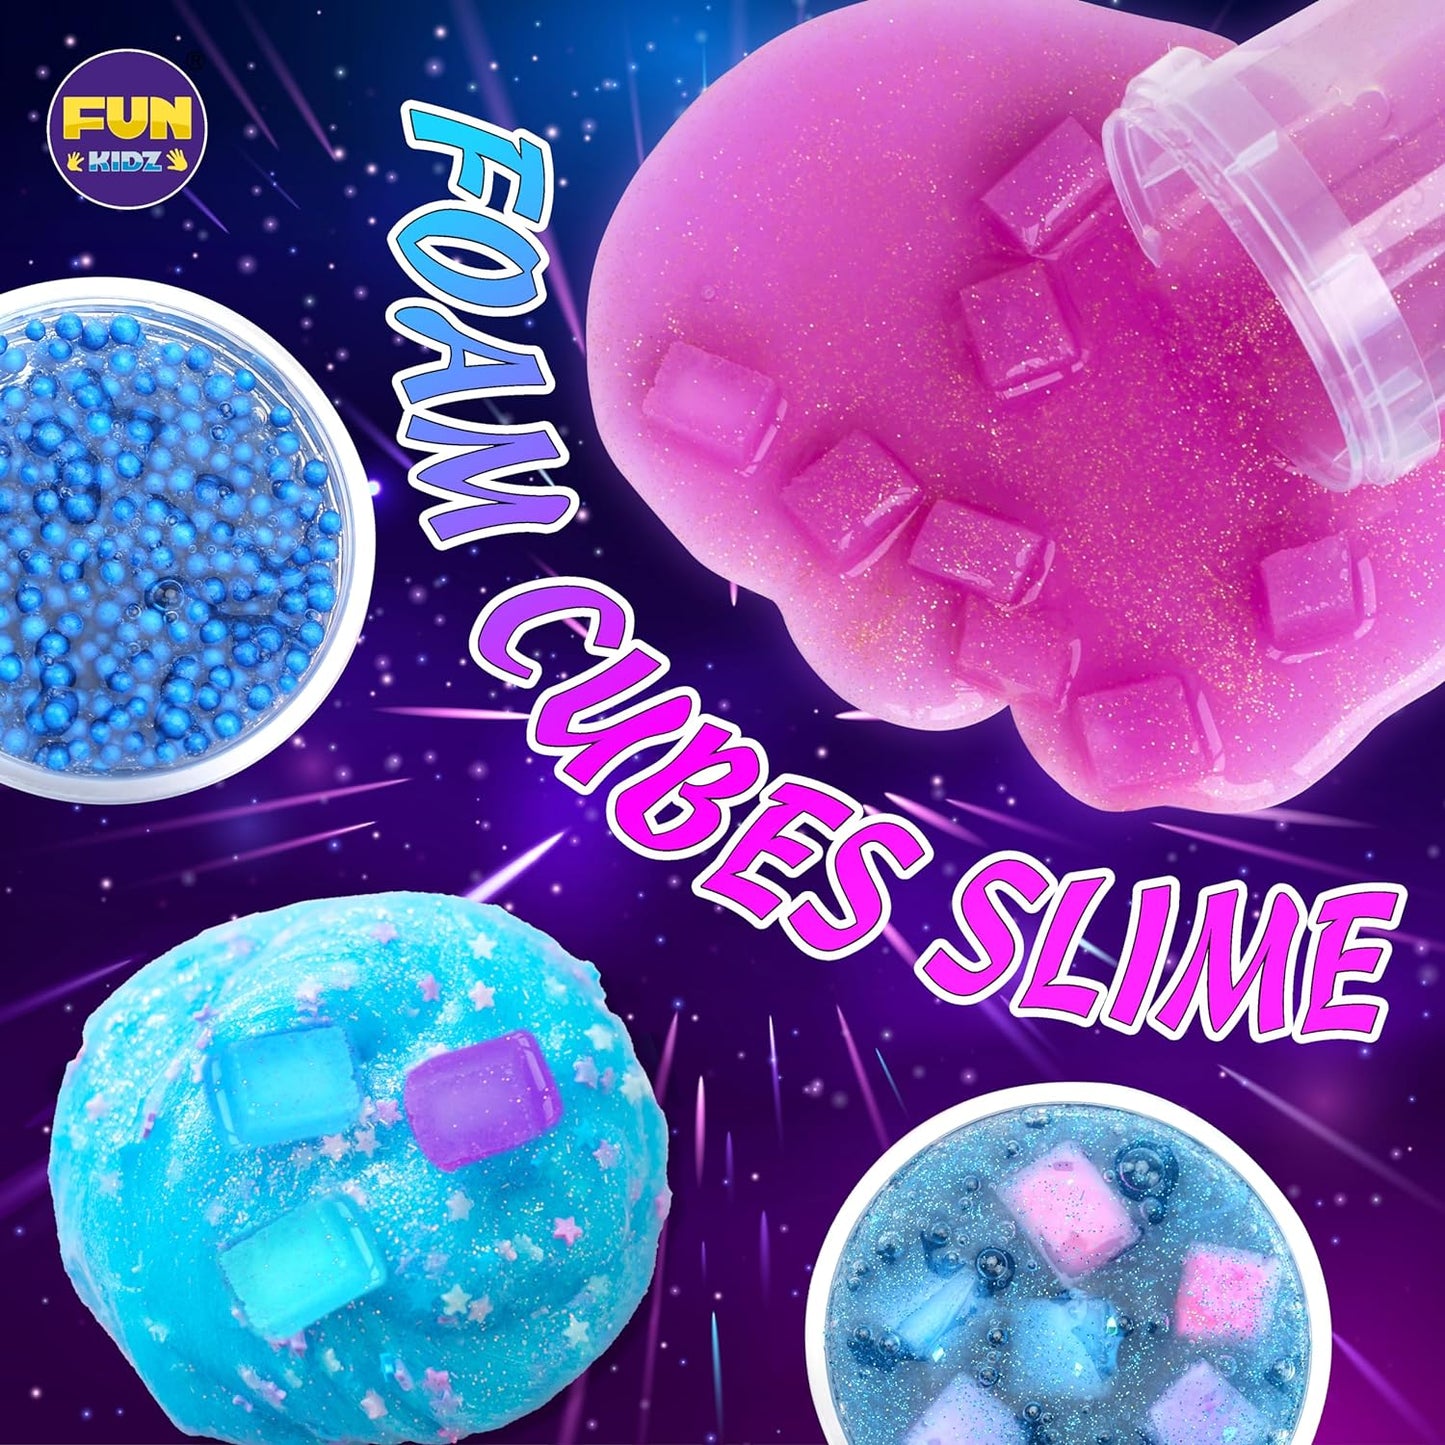 Toy Galaxy Slime Kit for Boys Girls 10-12, Funkidz Ultimate Metallic Slime Making Kit for Kids Ages 8-10 D.I.Y. Glow, Galactic, Fun Slime Gifts